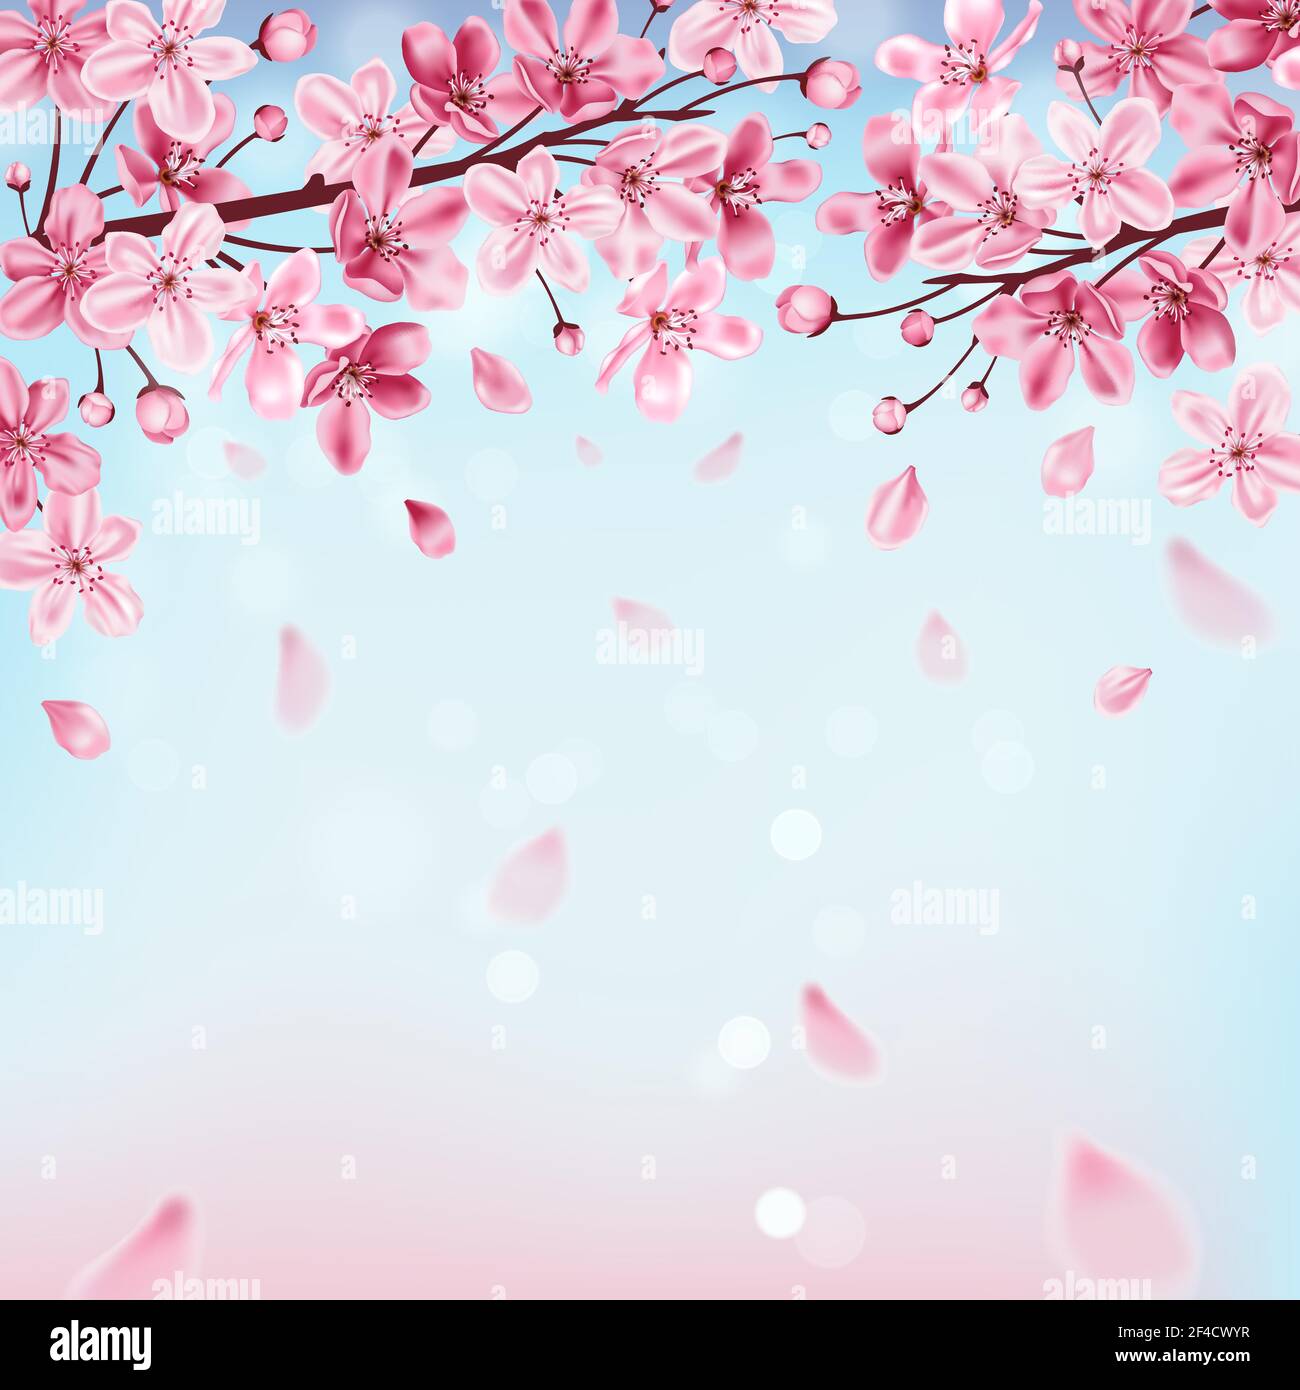 Spring background with pink flowering cherry branch and blue sky. Sakura blossom. Vector illustration. Stock Vector